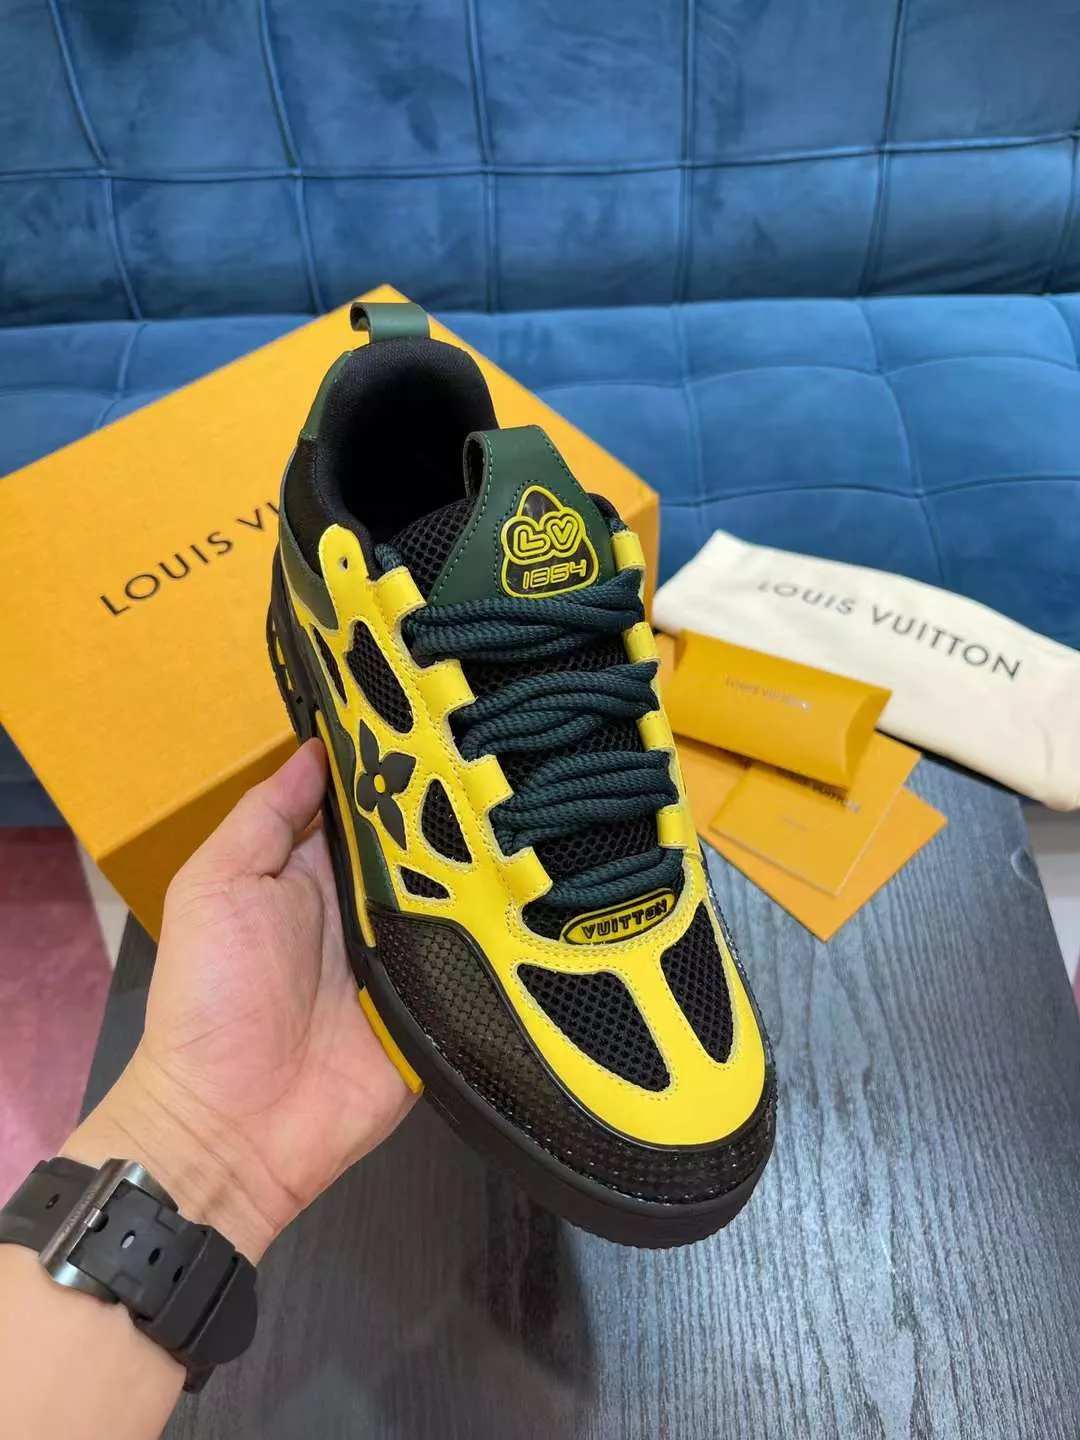 Luxurious LV Branded Shoes